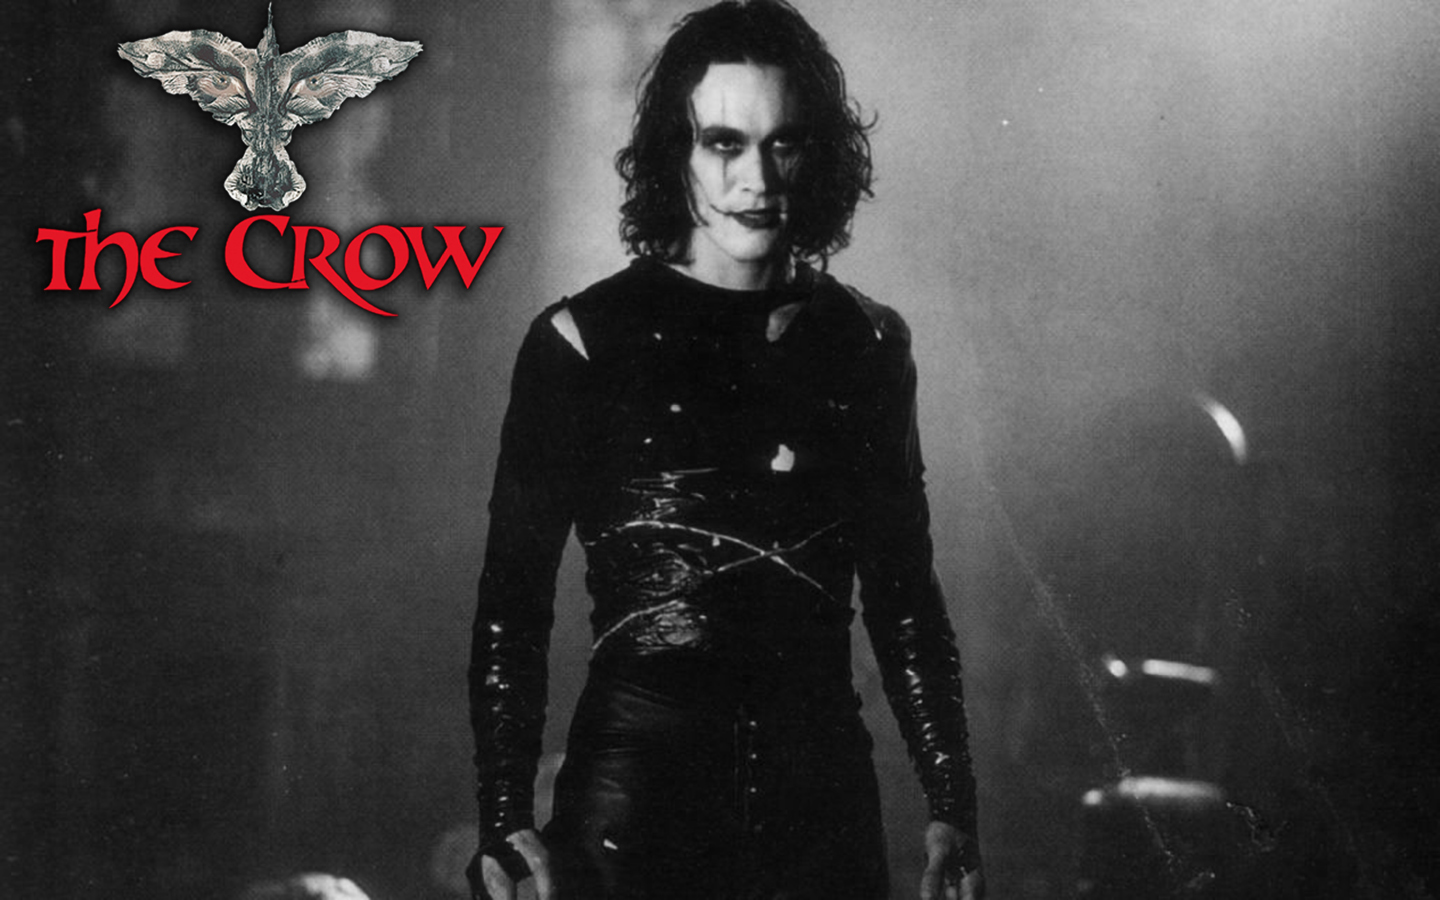 Pre-Production for ‘The Crow’ Reboot Set to Begin in February